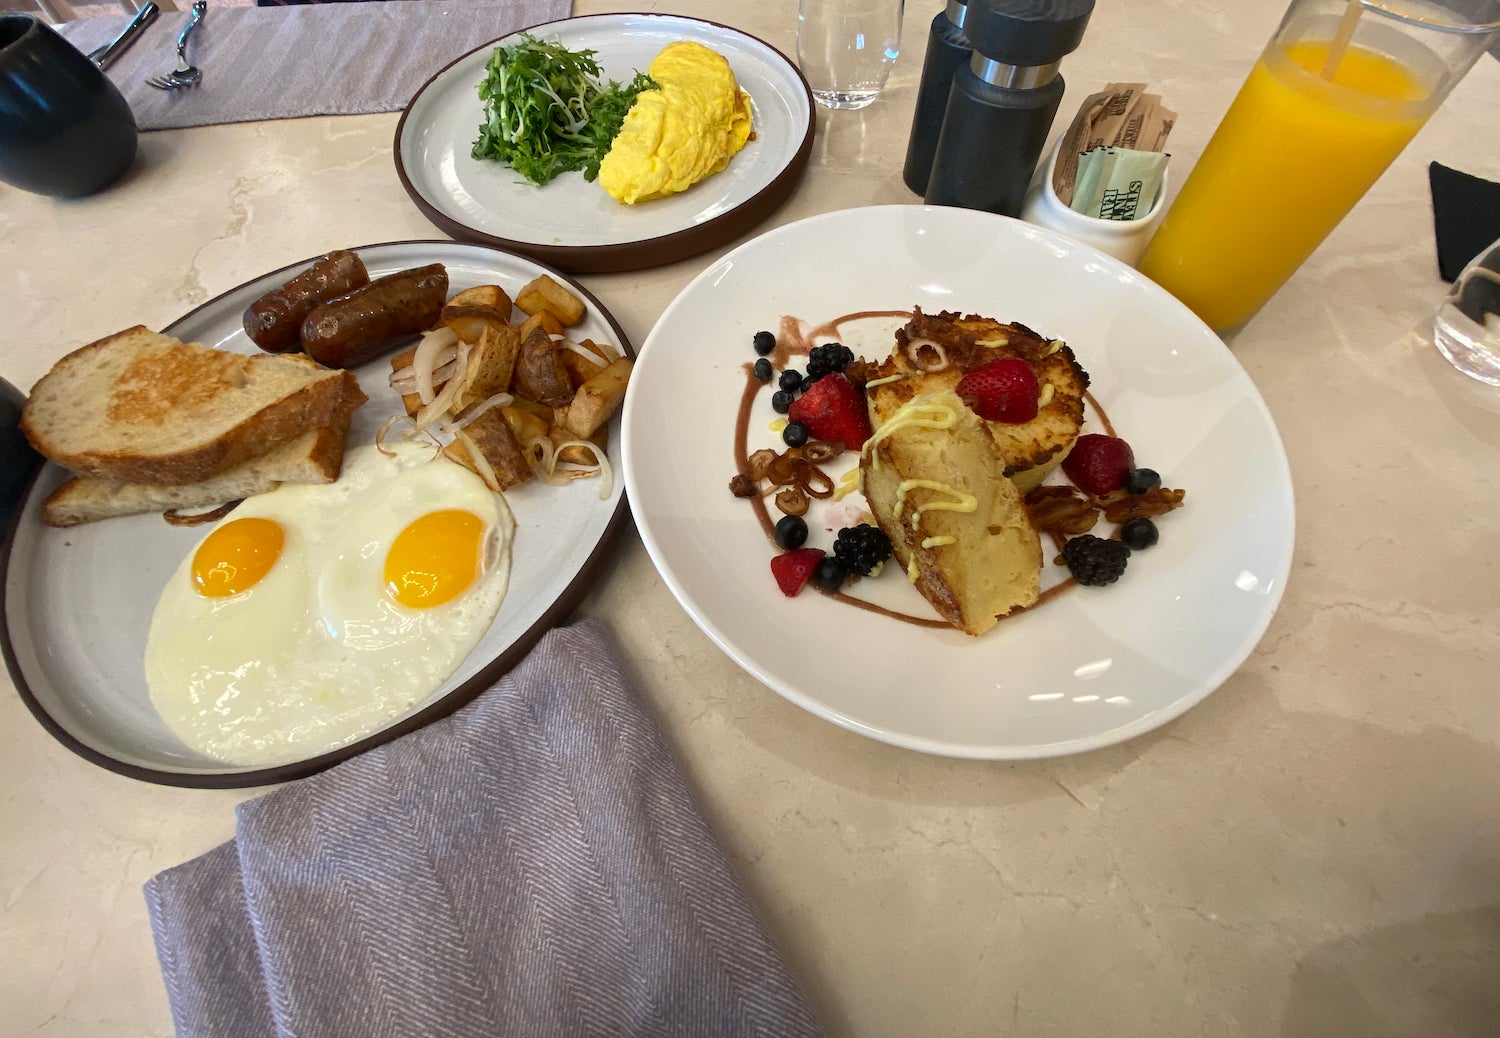 French toast, eggs and sausage and an omelette